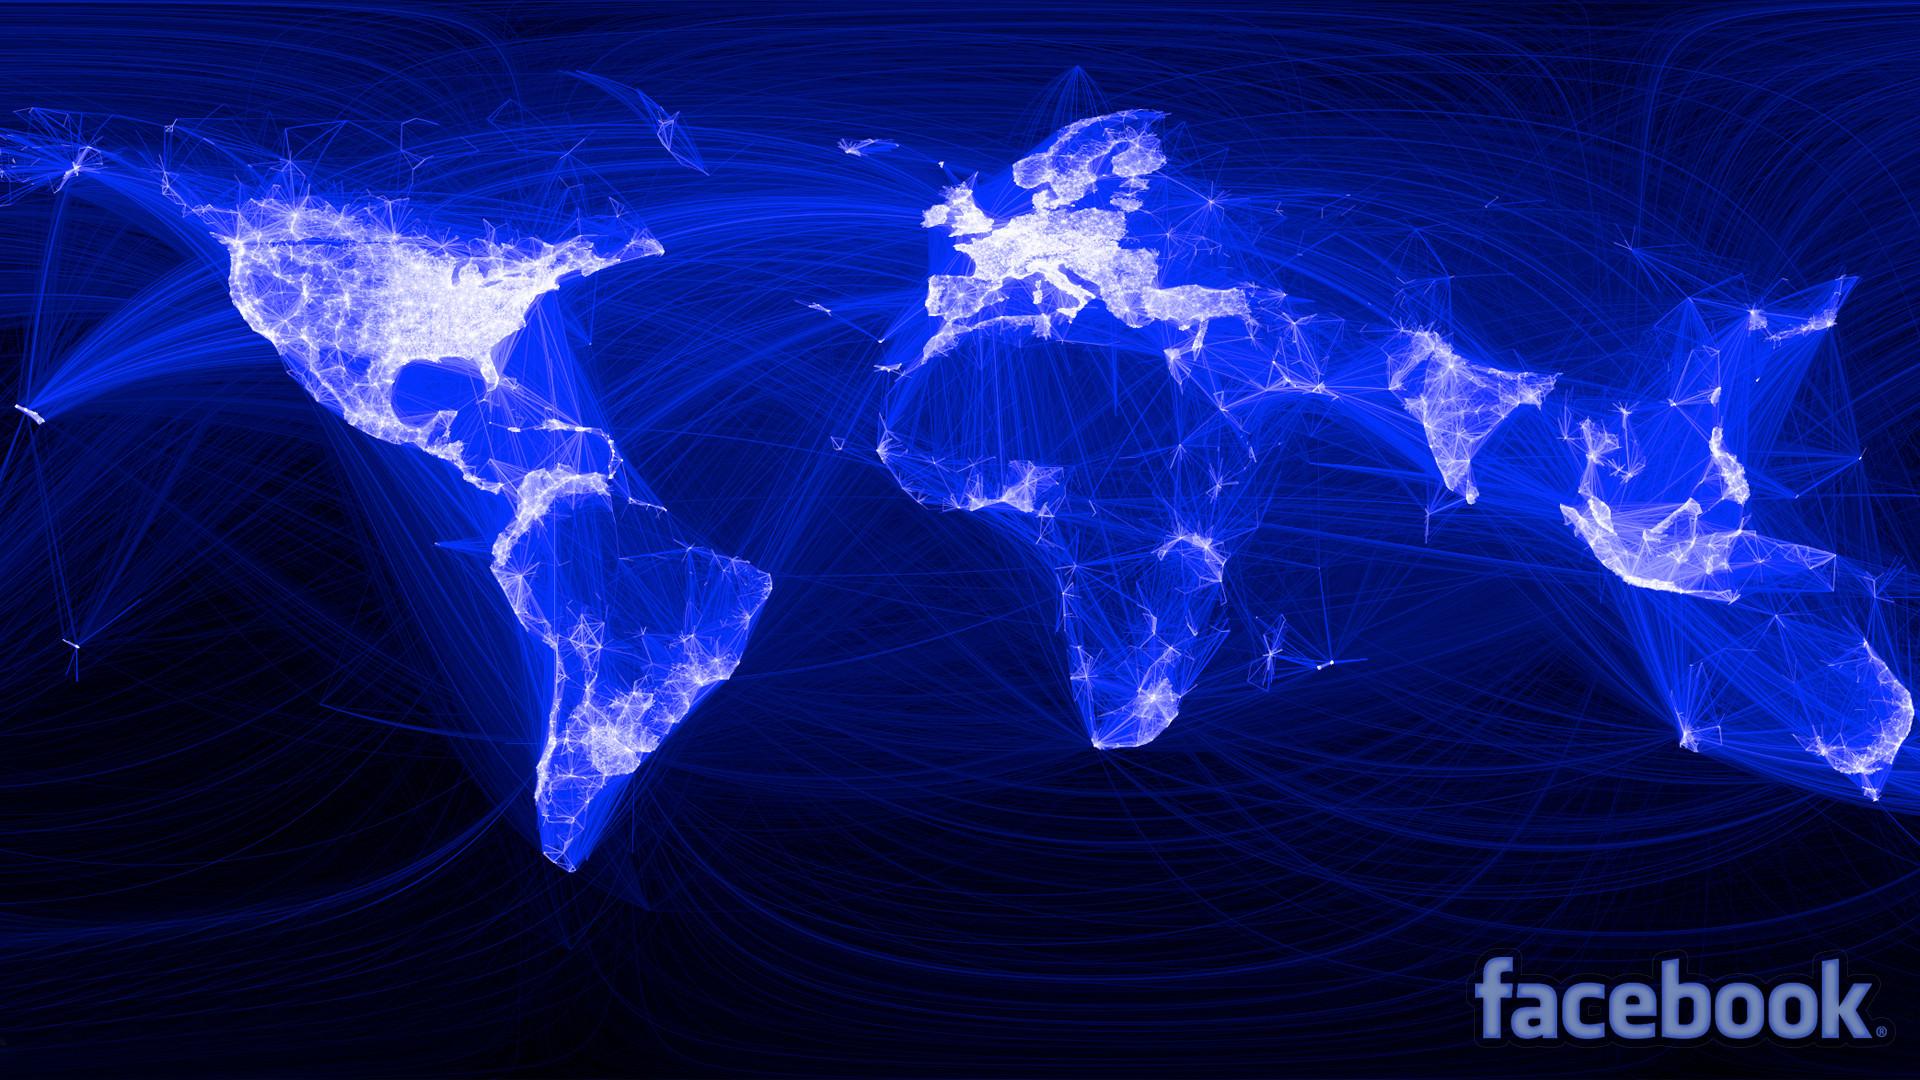 Facebook Cyber lines (Facebook Cover resolutions) Wallpaper. HD